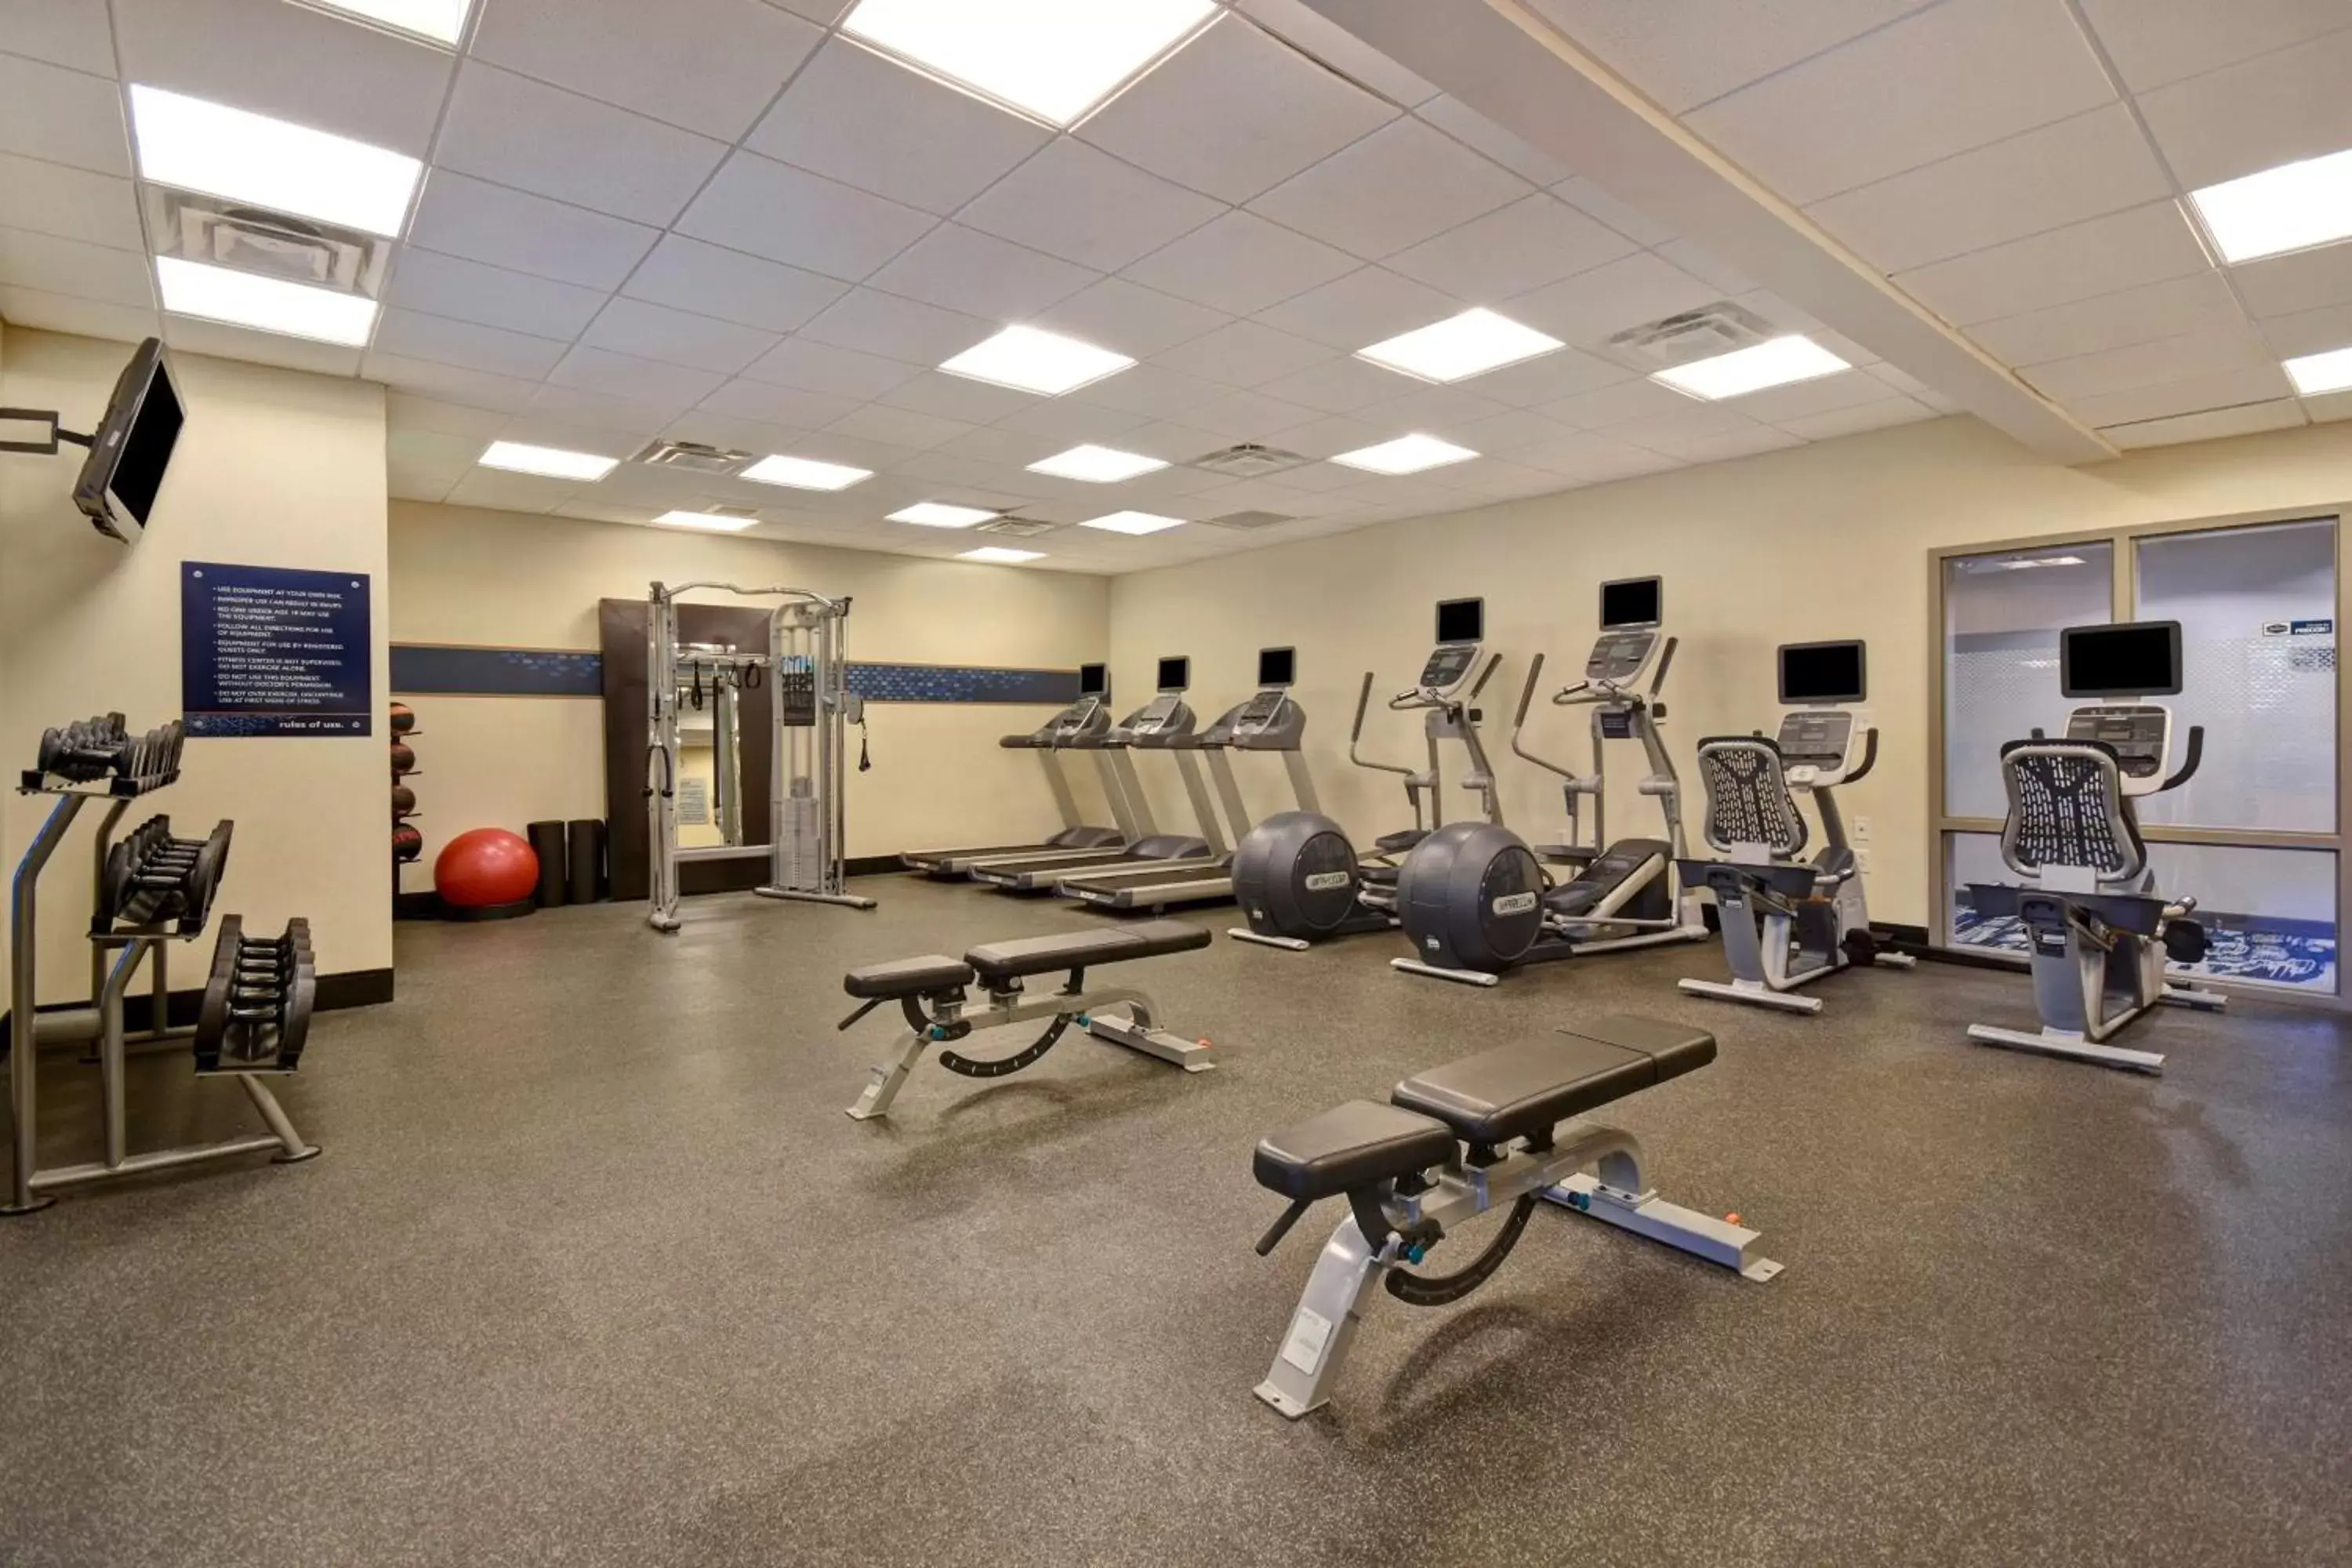 Fitness centre/facilities, Fitness Center/Facilities in Hampton Inn & Suites - Columbia South, MD